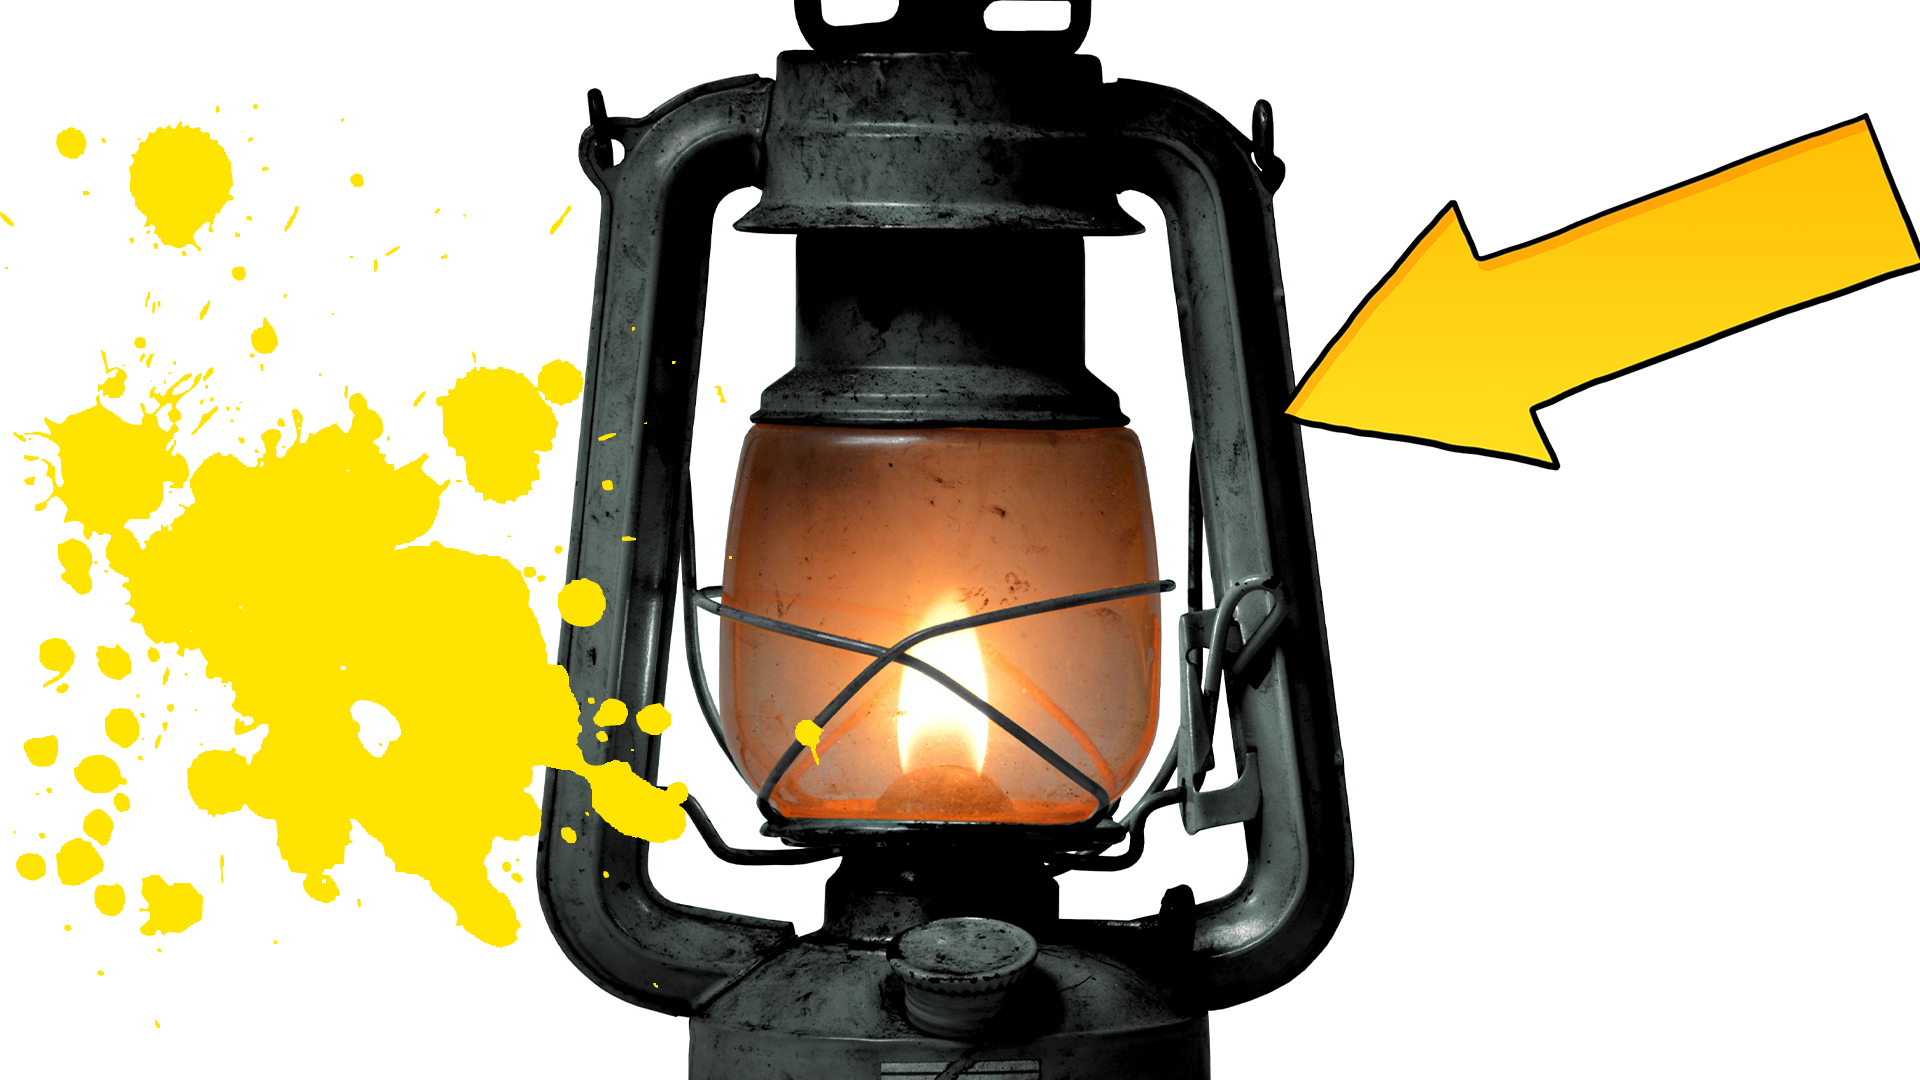 Lantern with arrow and splats